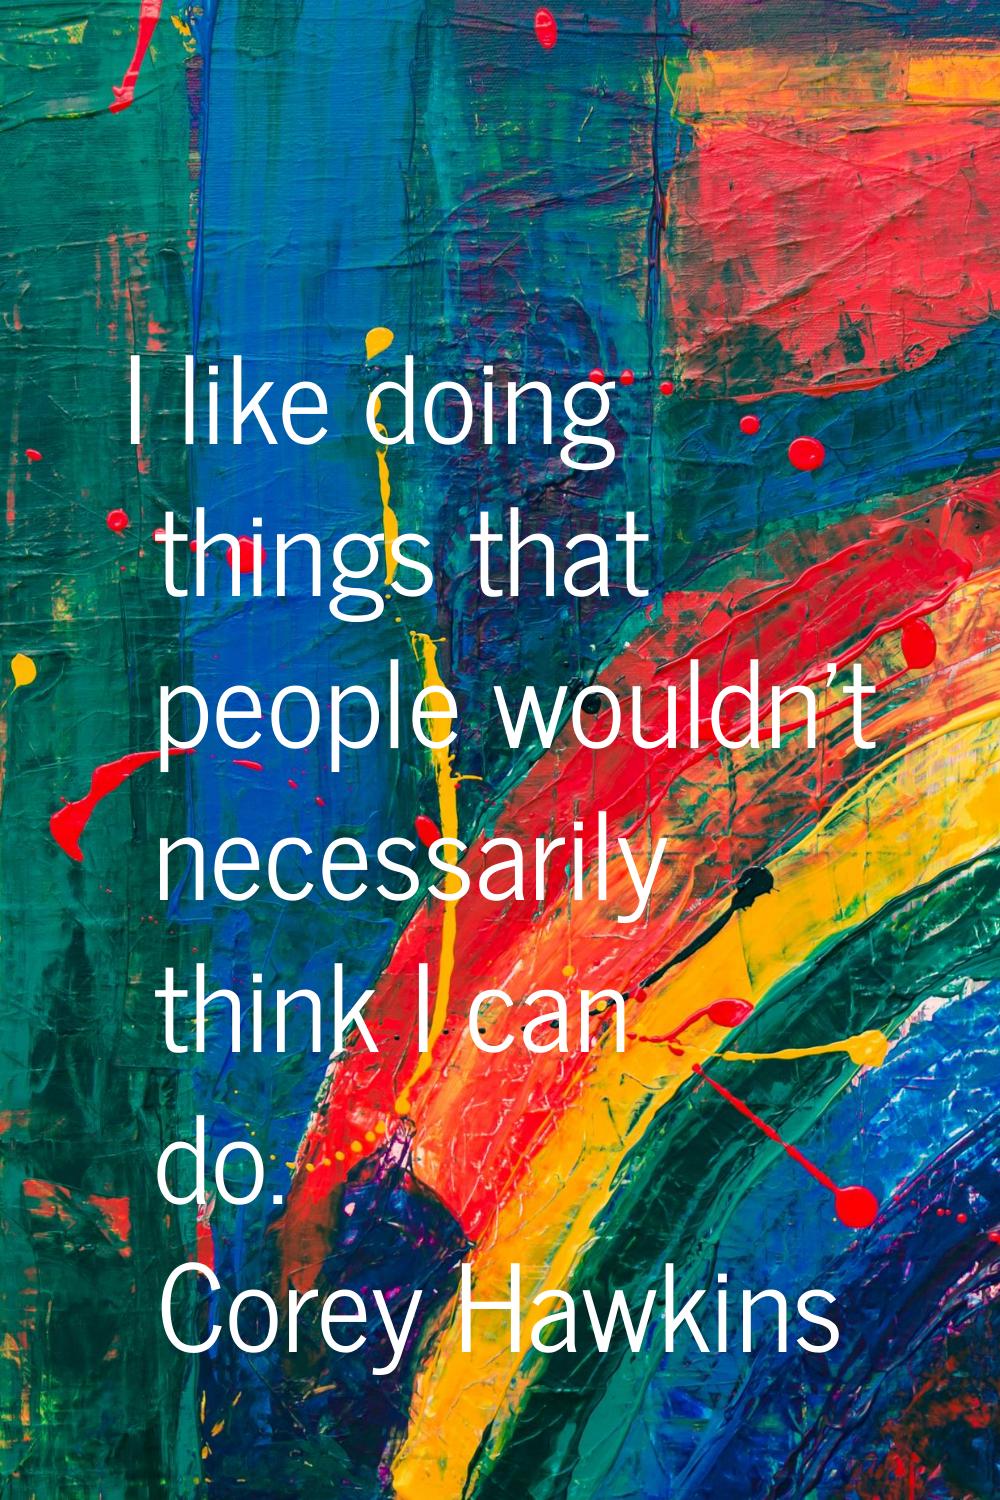 I like doing things that people wouldn't necessarily think I can do.